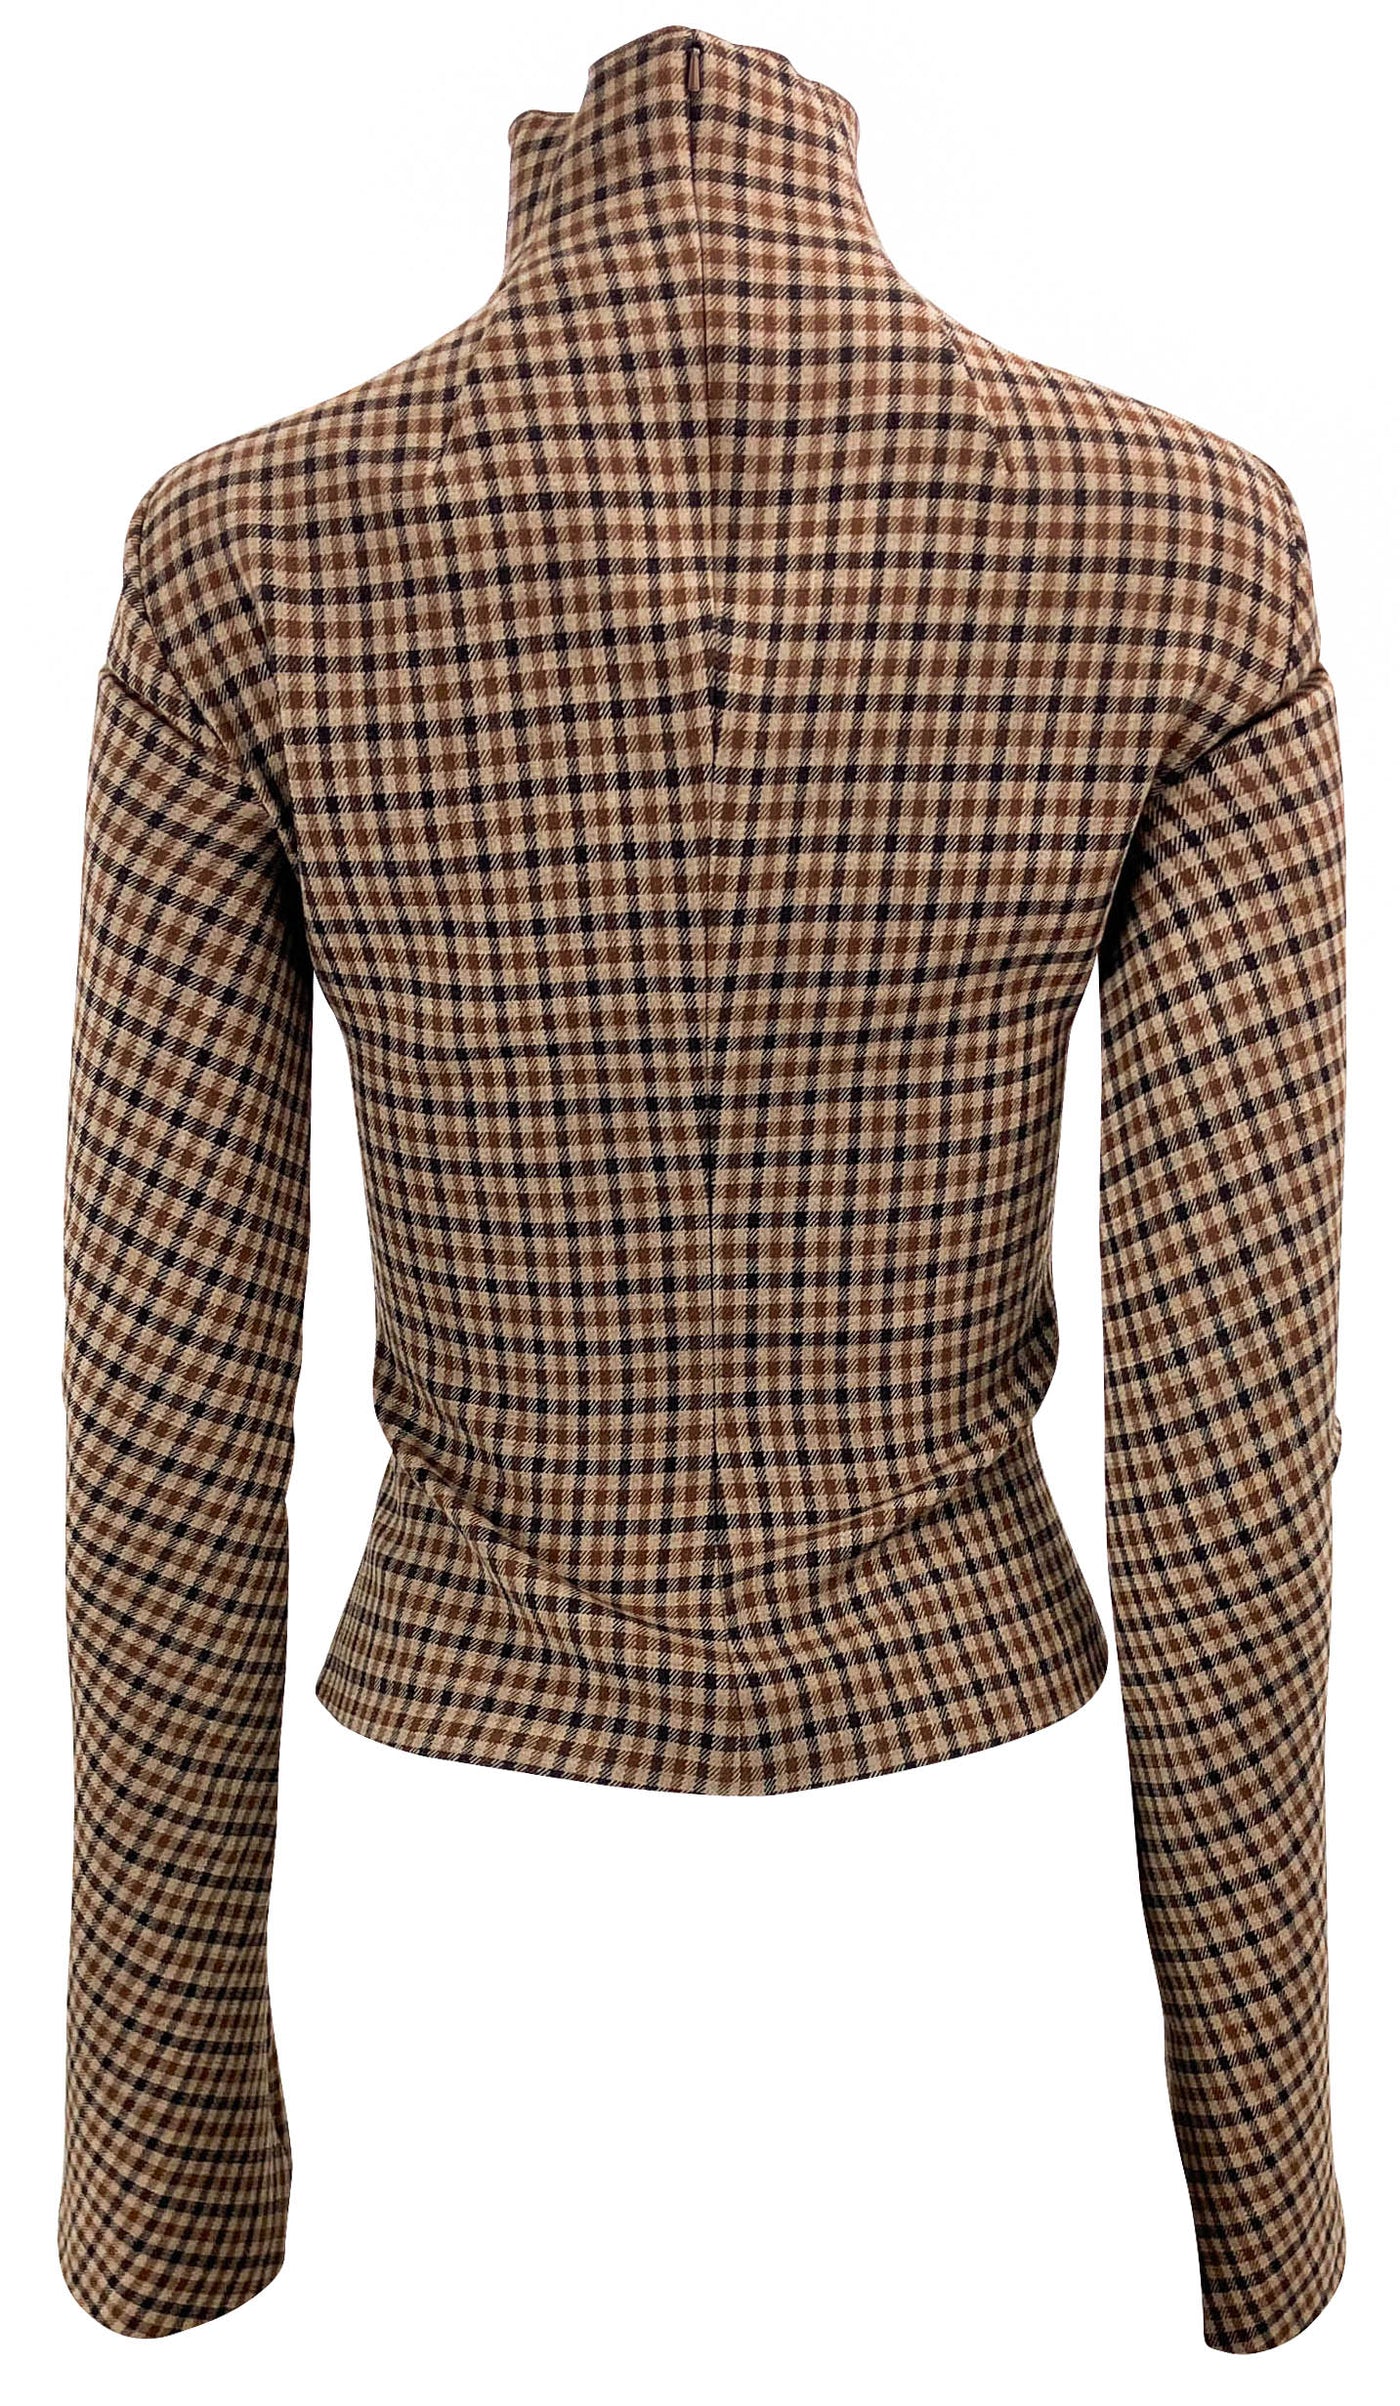 A.W.A.K.E. MODE Flare Sleeve Top in Brown Plaid - Discounts on A.W.A.K.E. MODE at UAL